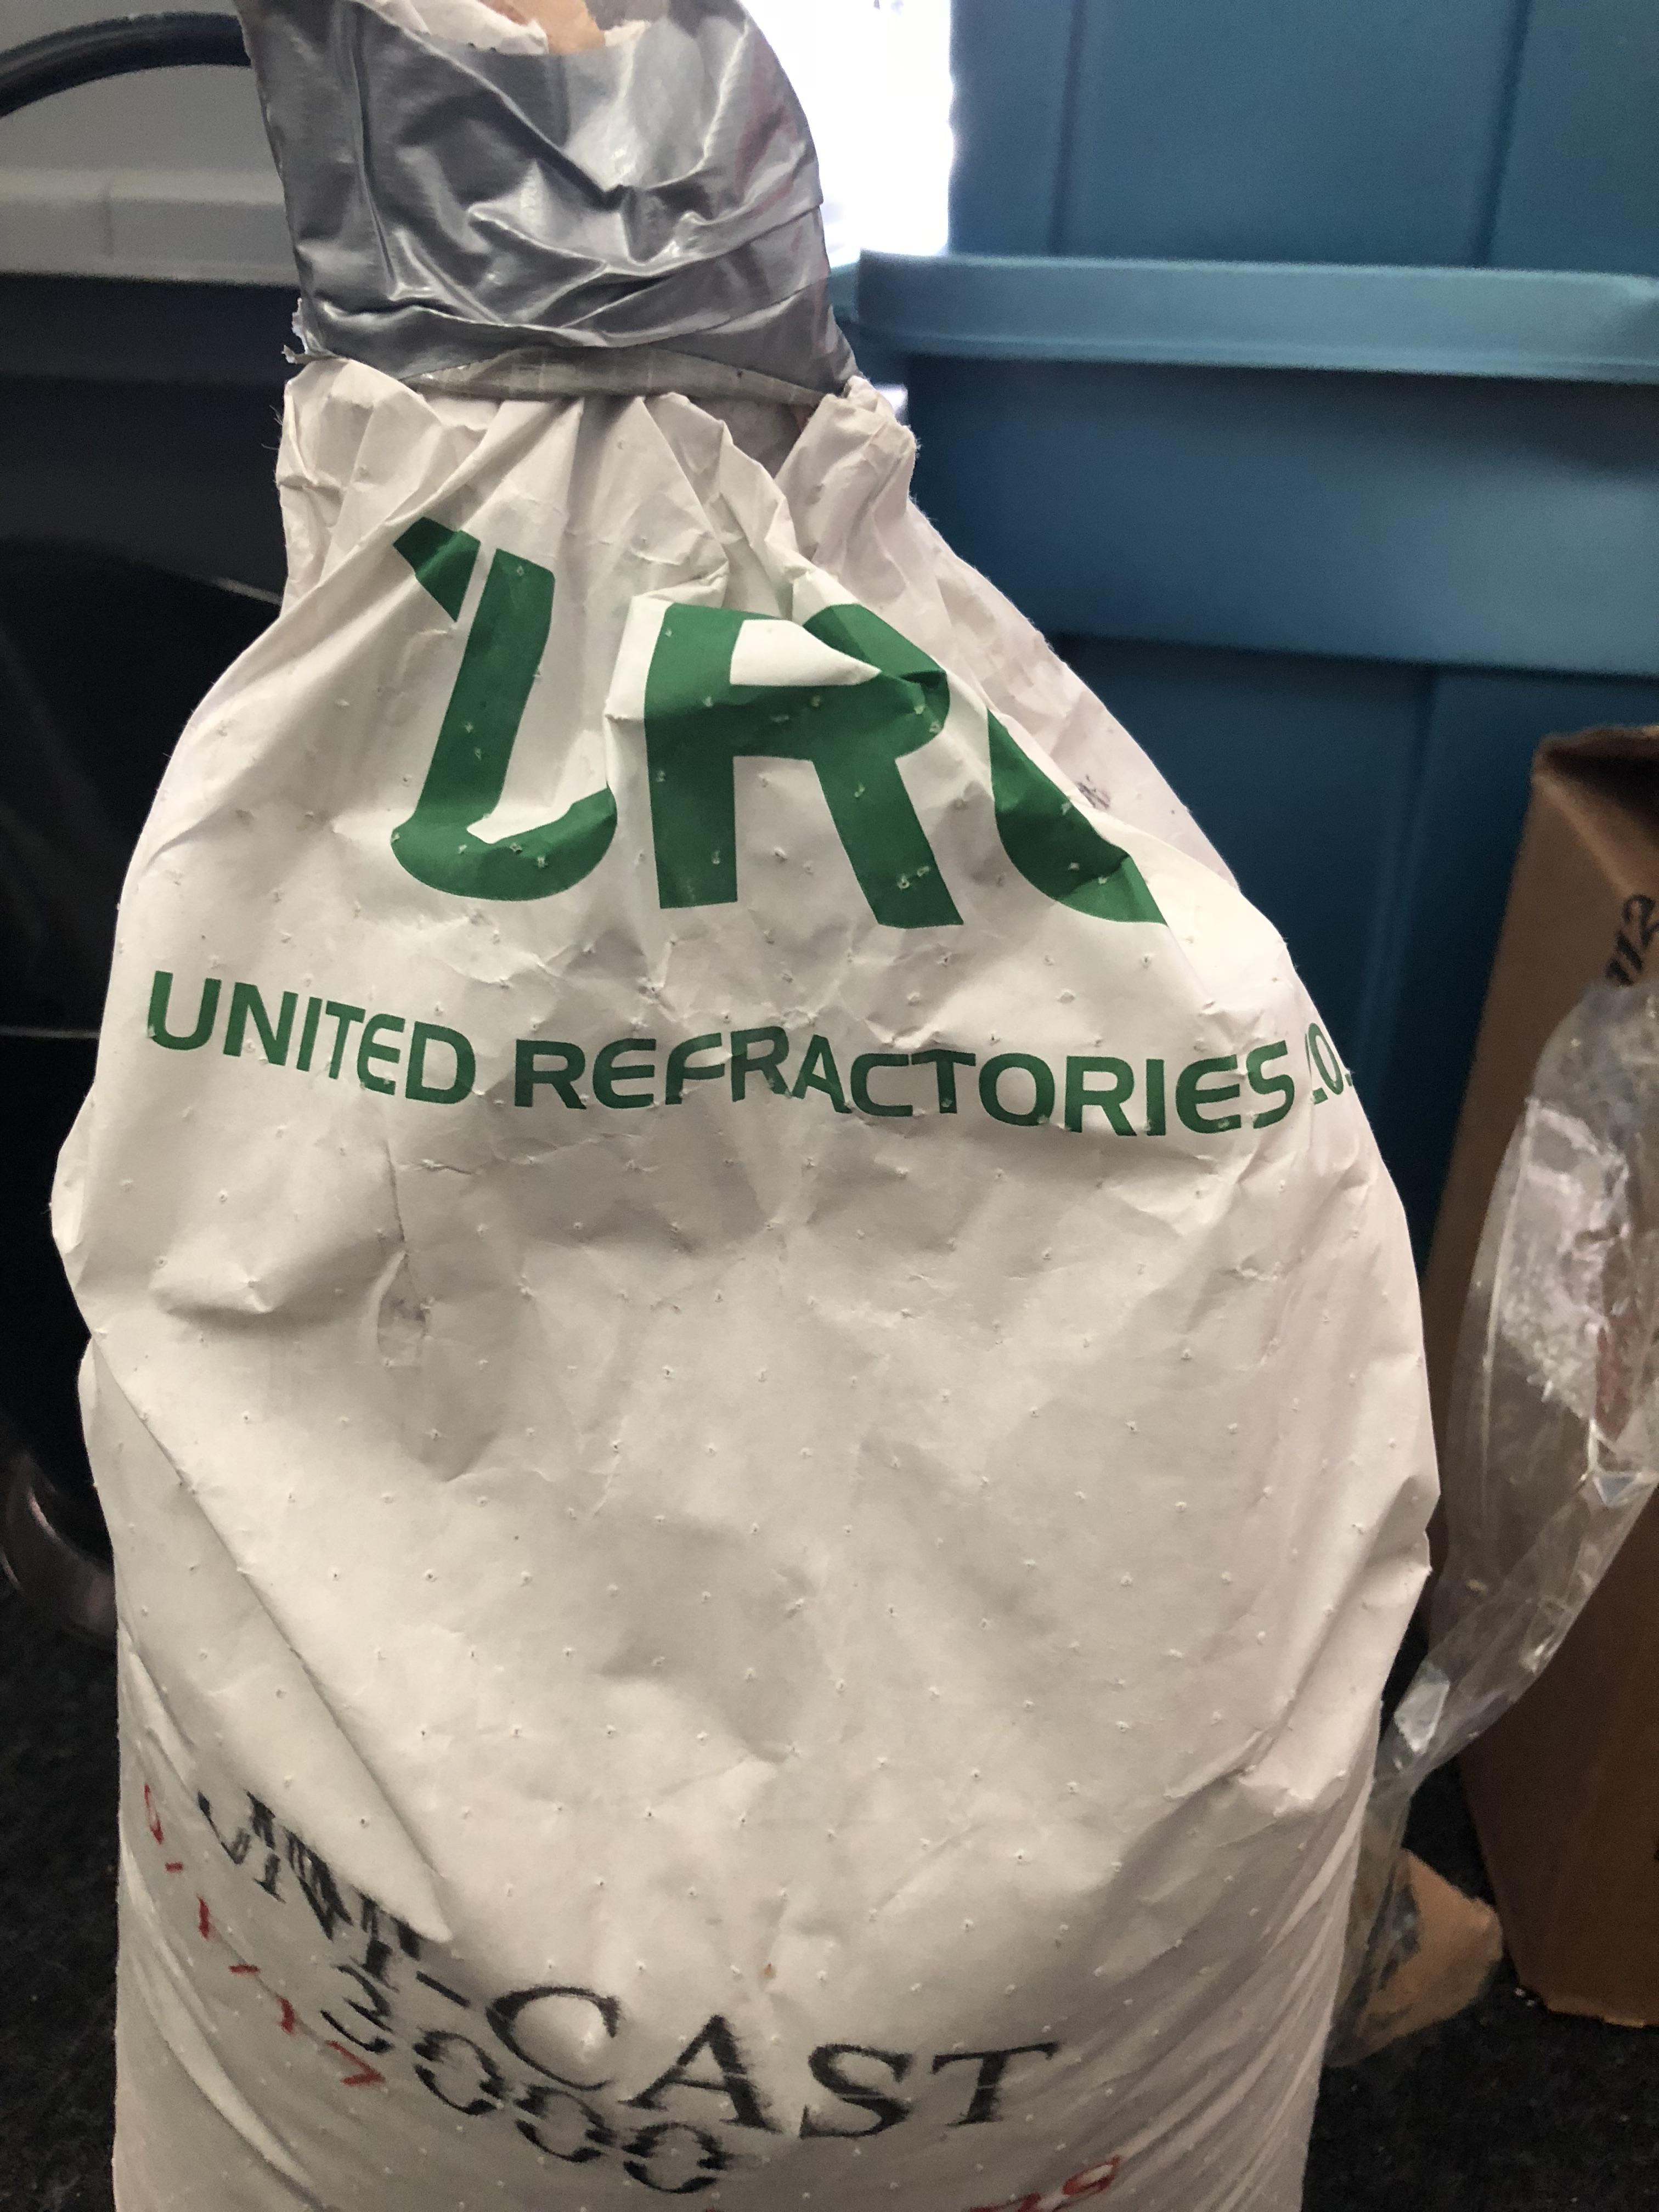 Sifting Refractory? - Insulation and Refractories - I Forge Iron